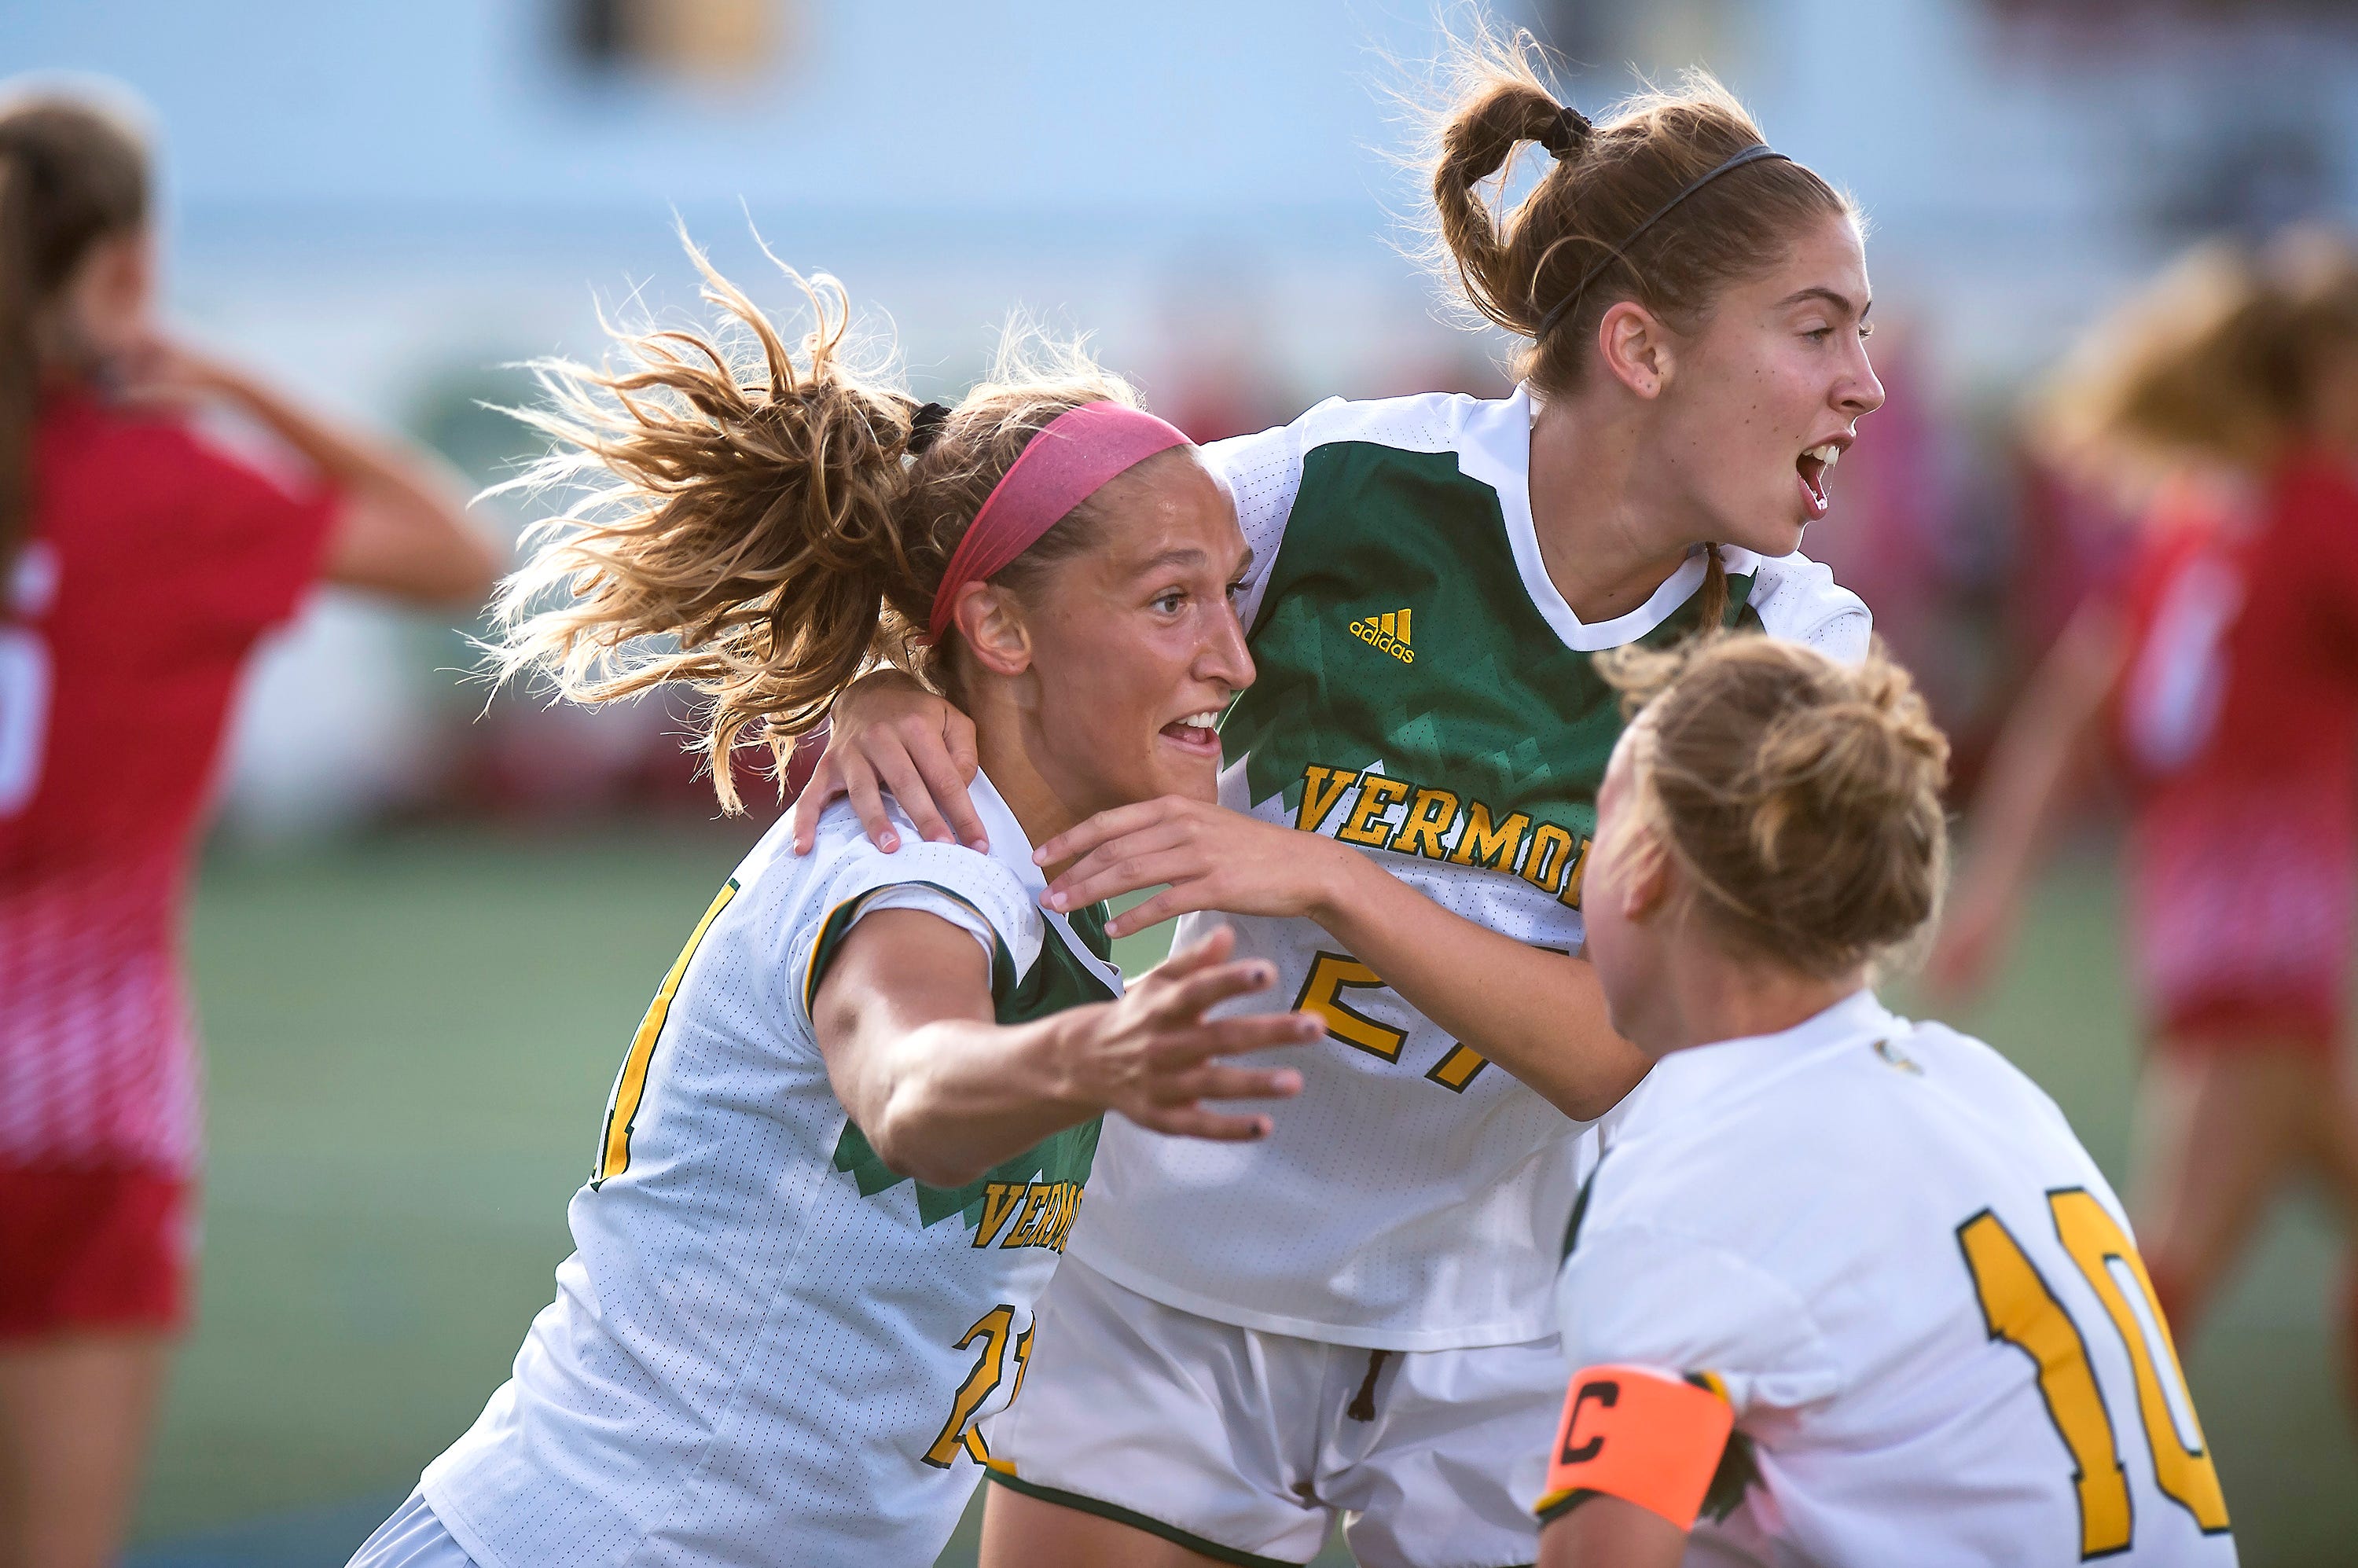 Natalie Durieux's first collegiate goal lifts UVM women's soccer past Sacred Heart